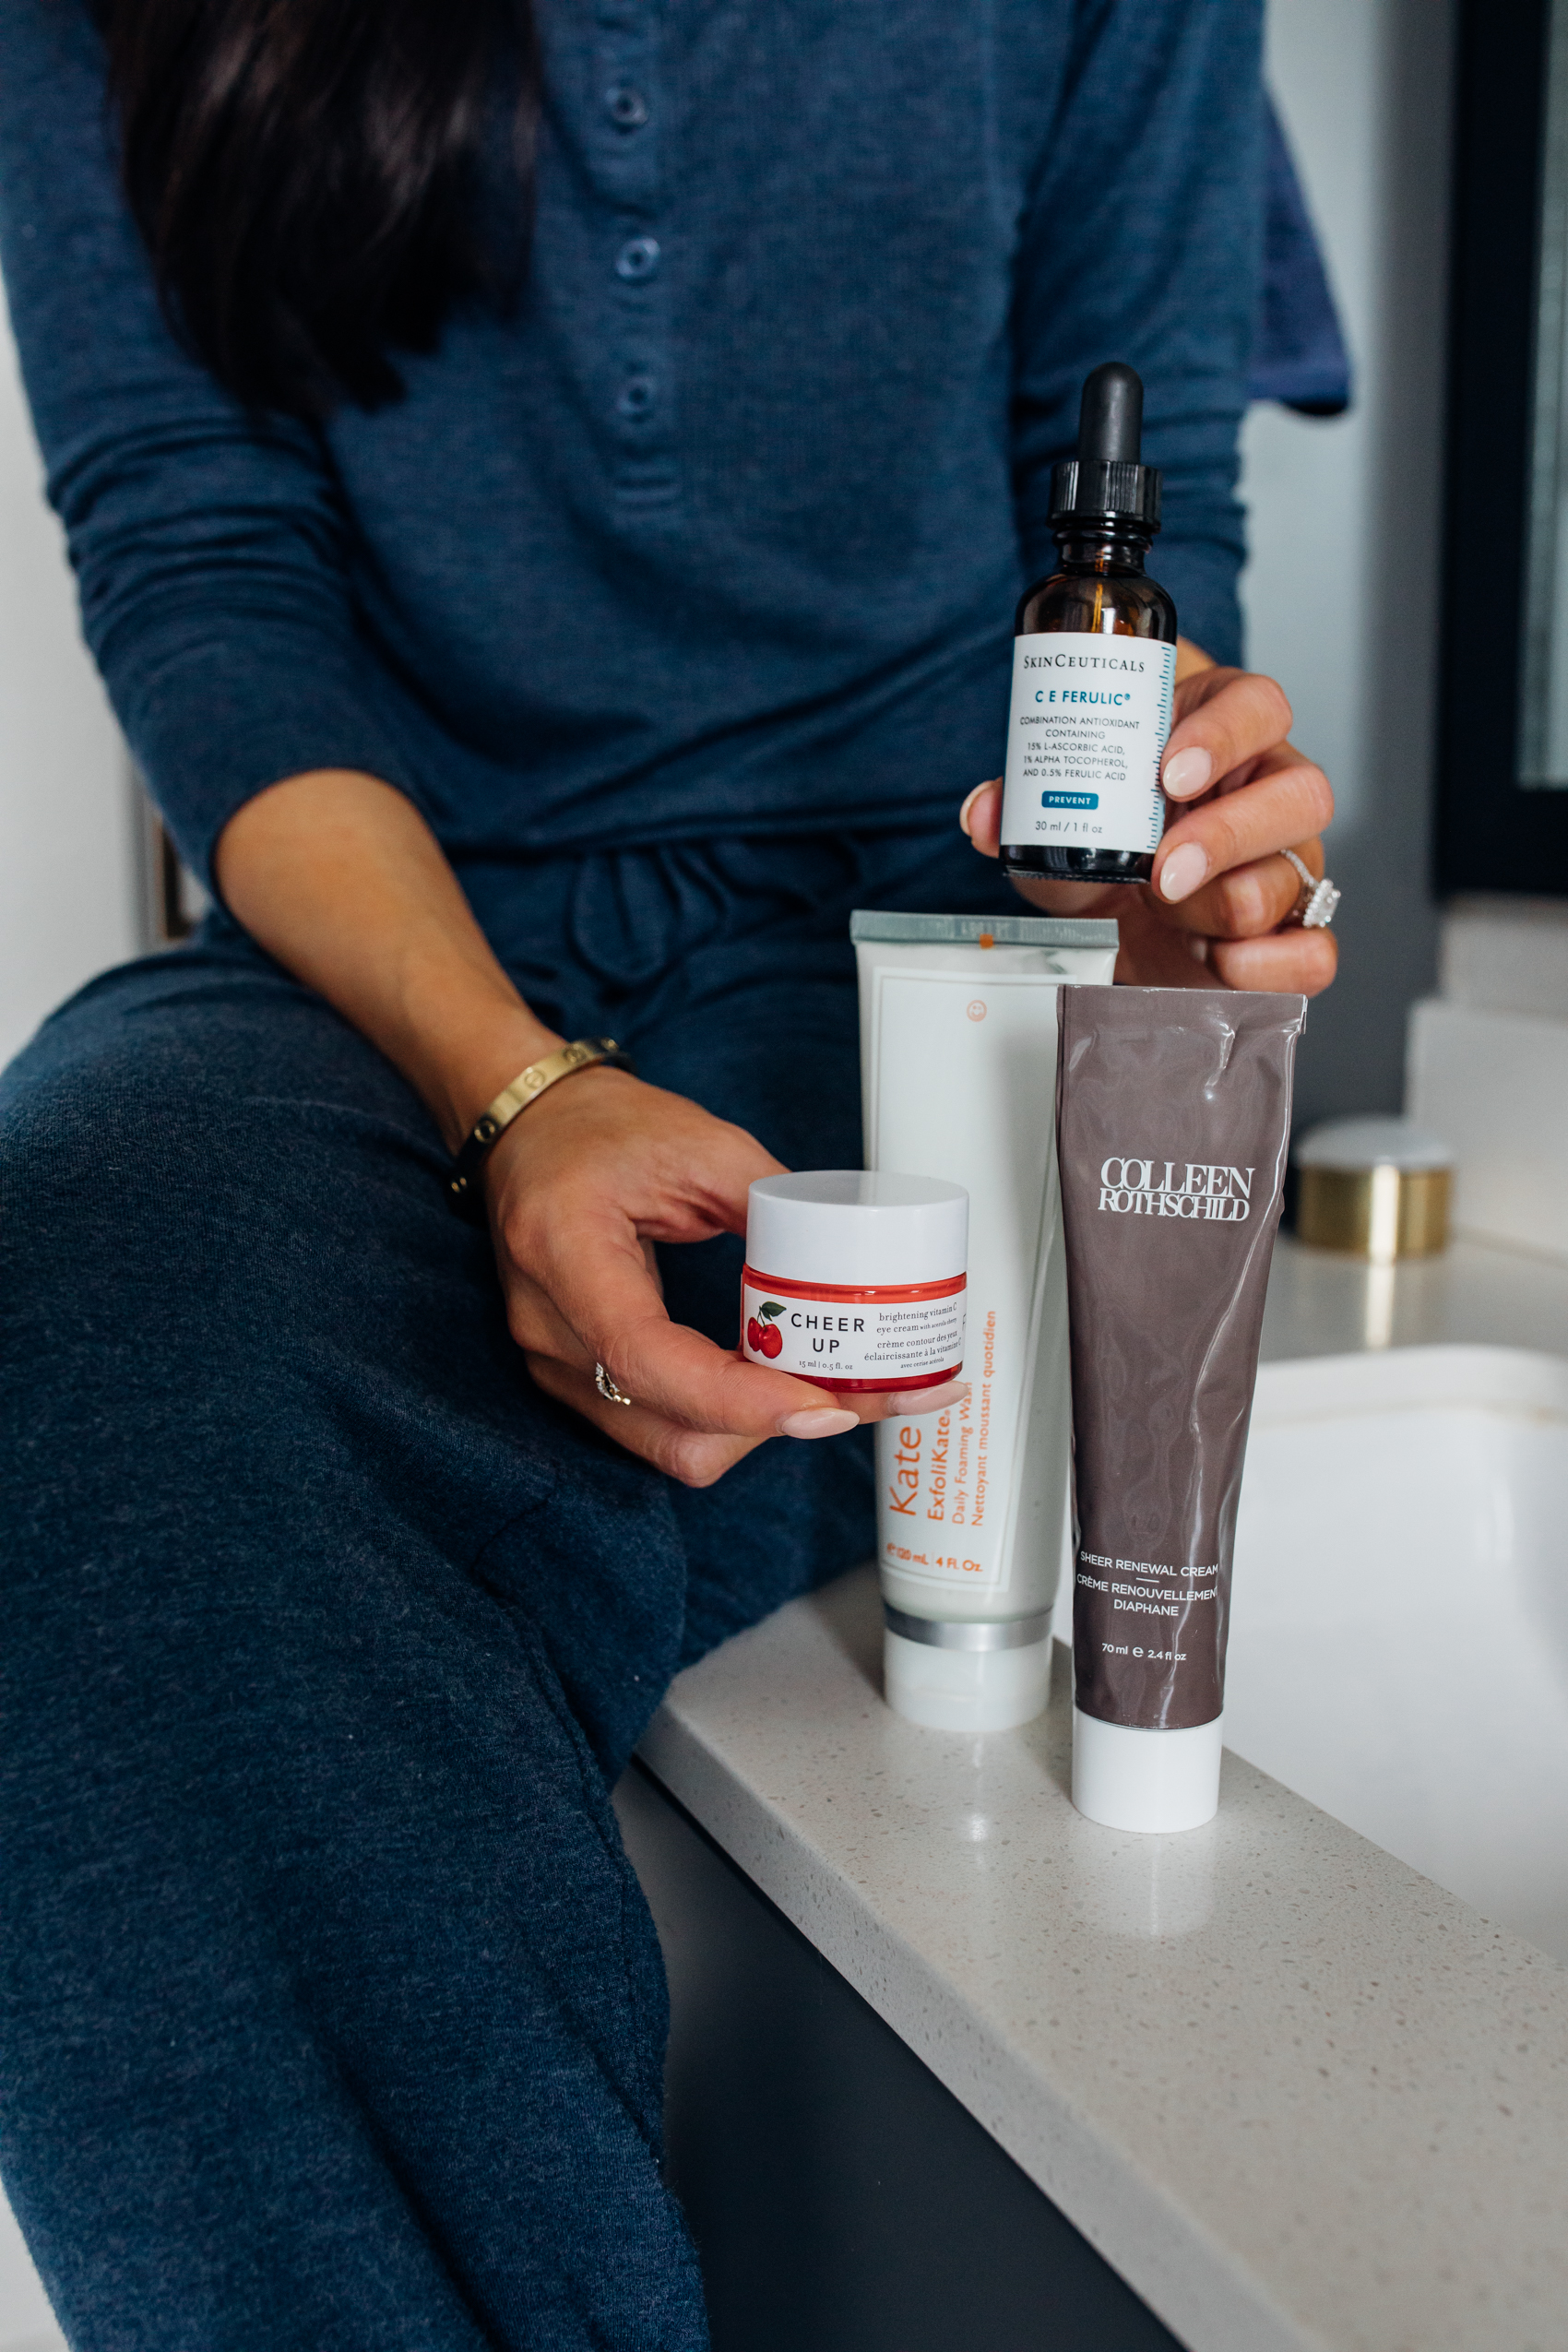 Blogger Hoang-Kim shares her morning skincare routine with farmacy eye cream, Colleen Rothschild sheer renewal cream, Kate Sommerville cleanser and Skinceuticals C E Ferulic 